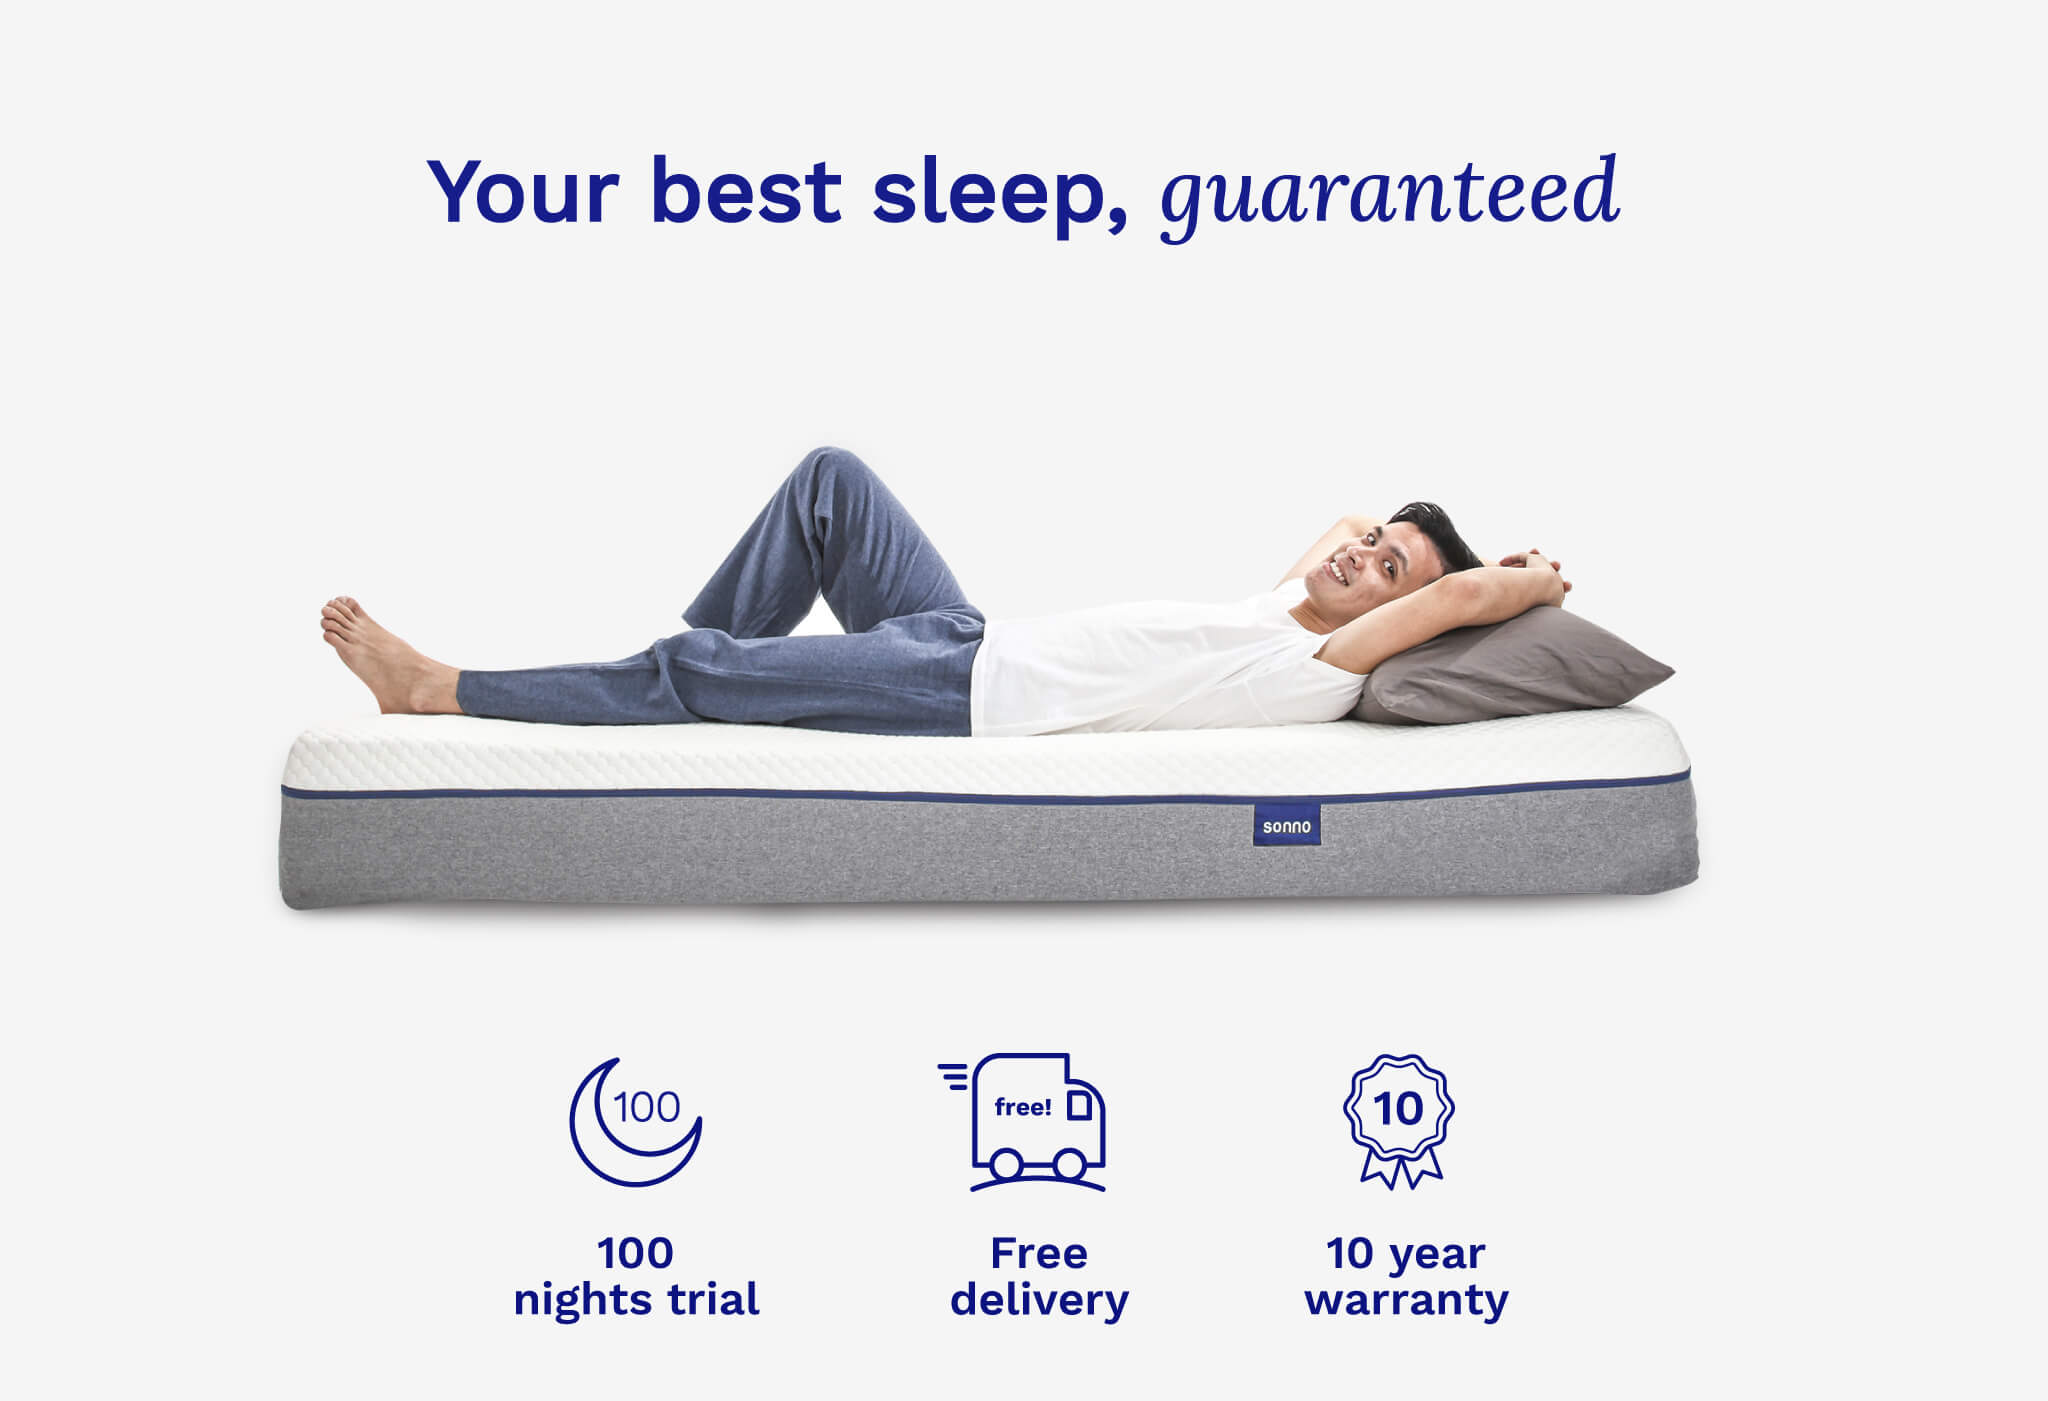 Sonno Original mattress with 100-night trial, free delivery across Malaysia, and comprehensive warranty coverage.